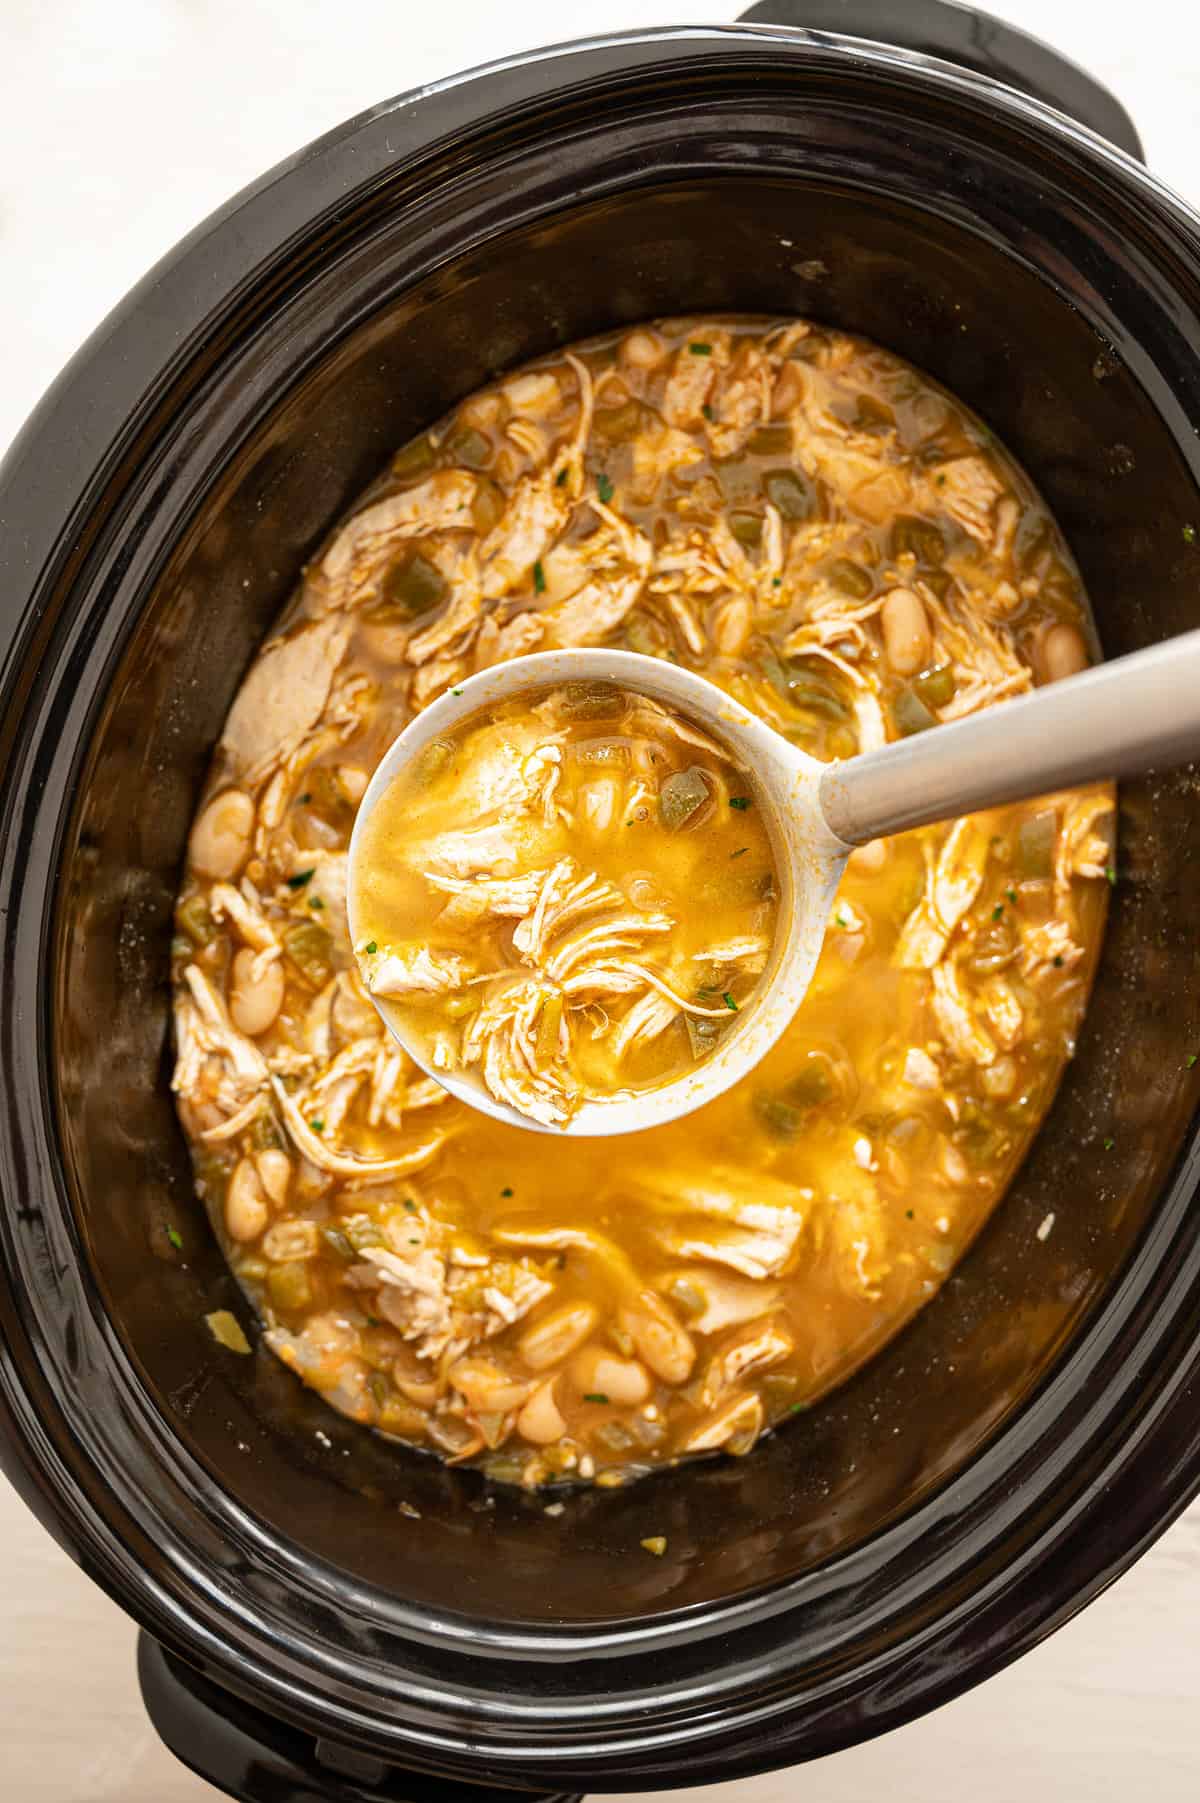 A ladle full of white chicken chili being served from a crock pot.